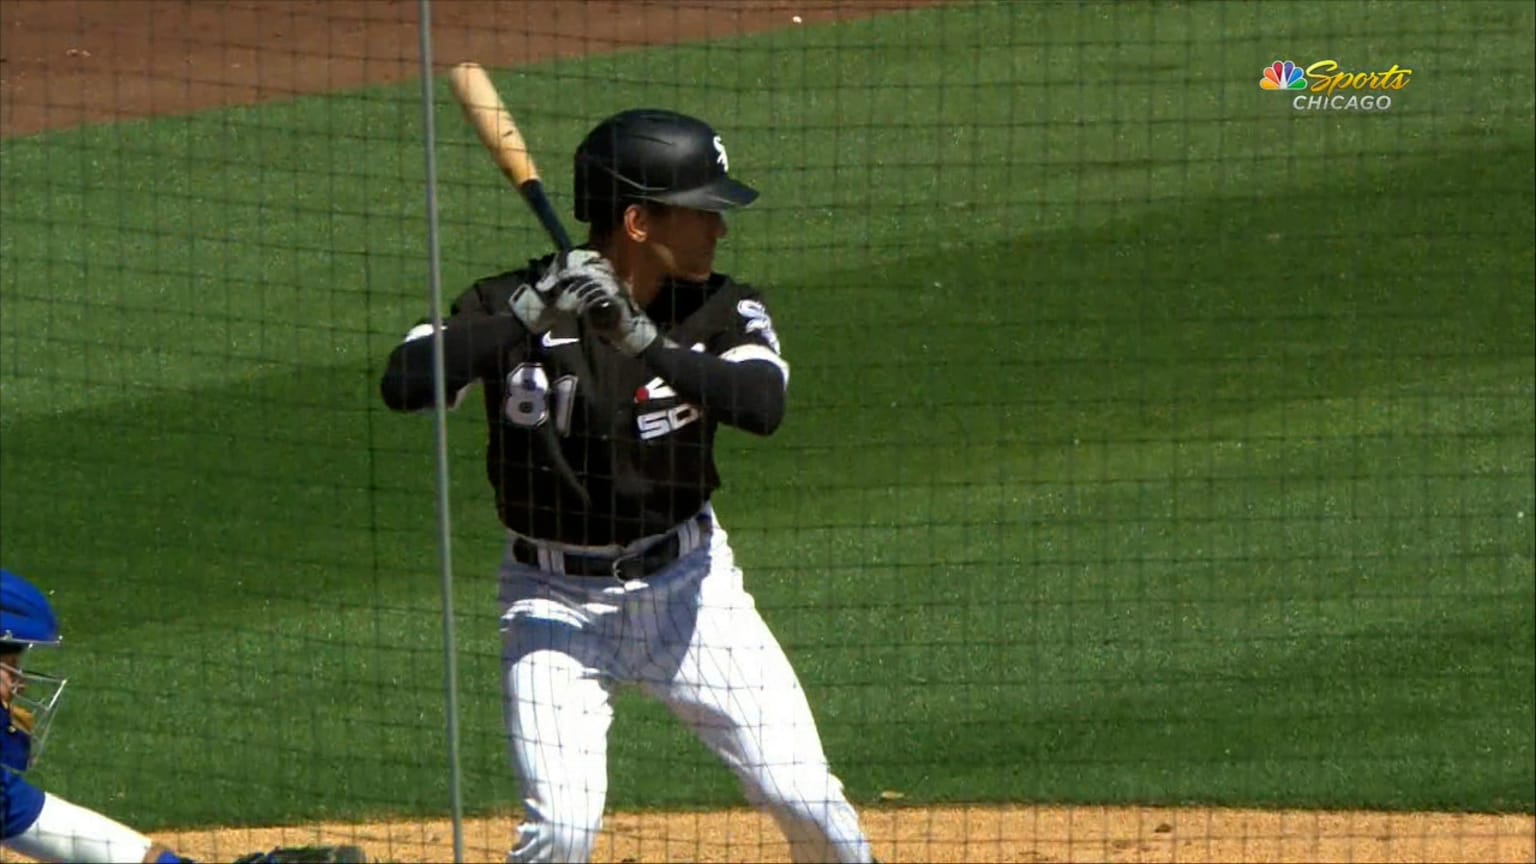 Zach Remillard gives White Sox the lead with 2-RBI double – NBC